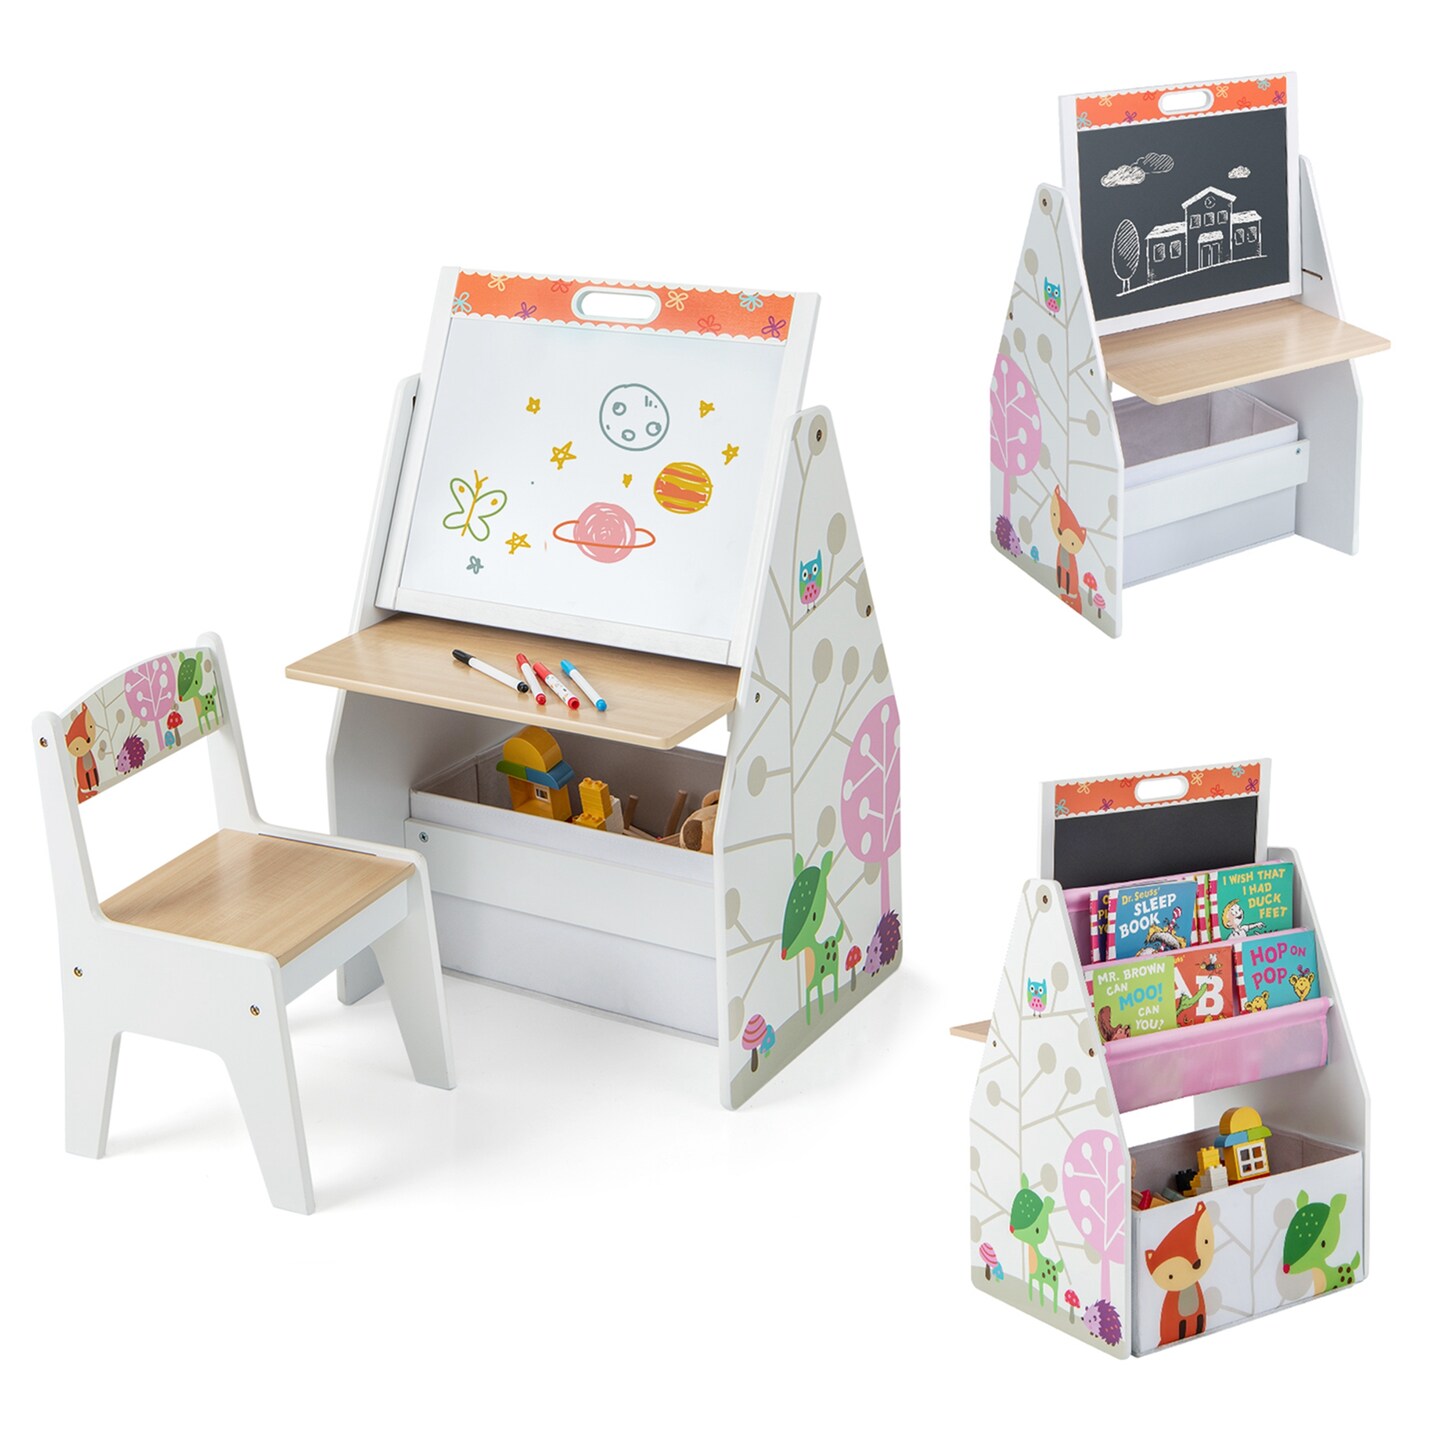 Costway Kids Table &#x26; Chair Set with Rotatable Double-sided Magnetic Blackboard &#x26; Whiteboard Grey/White